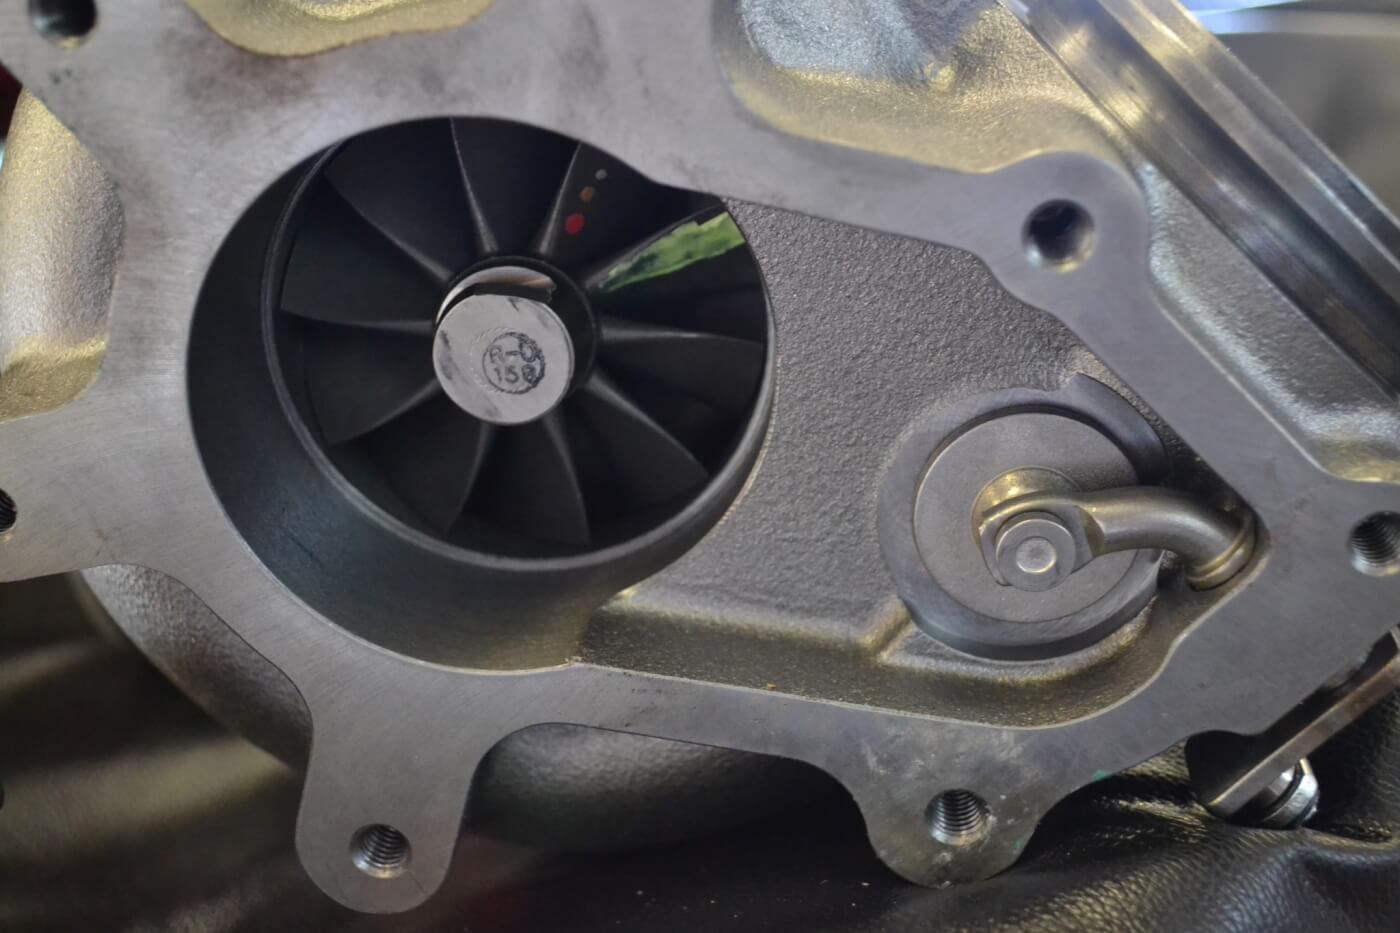 If you notice a funny-looking flange coming off the exhaust of some turbos, it’s because they have internal wastegates. An internal wastegate (arrow) is used to bypass the turbine wheel if drive pressures get too high.